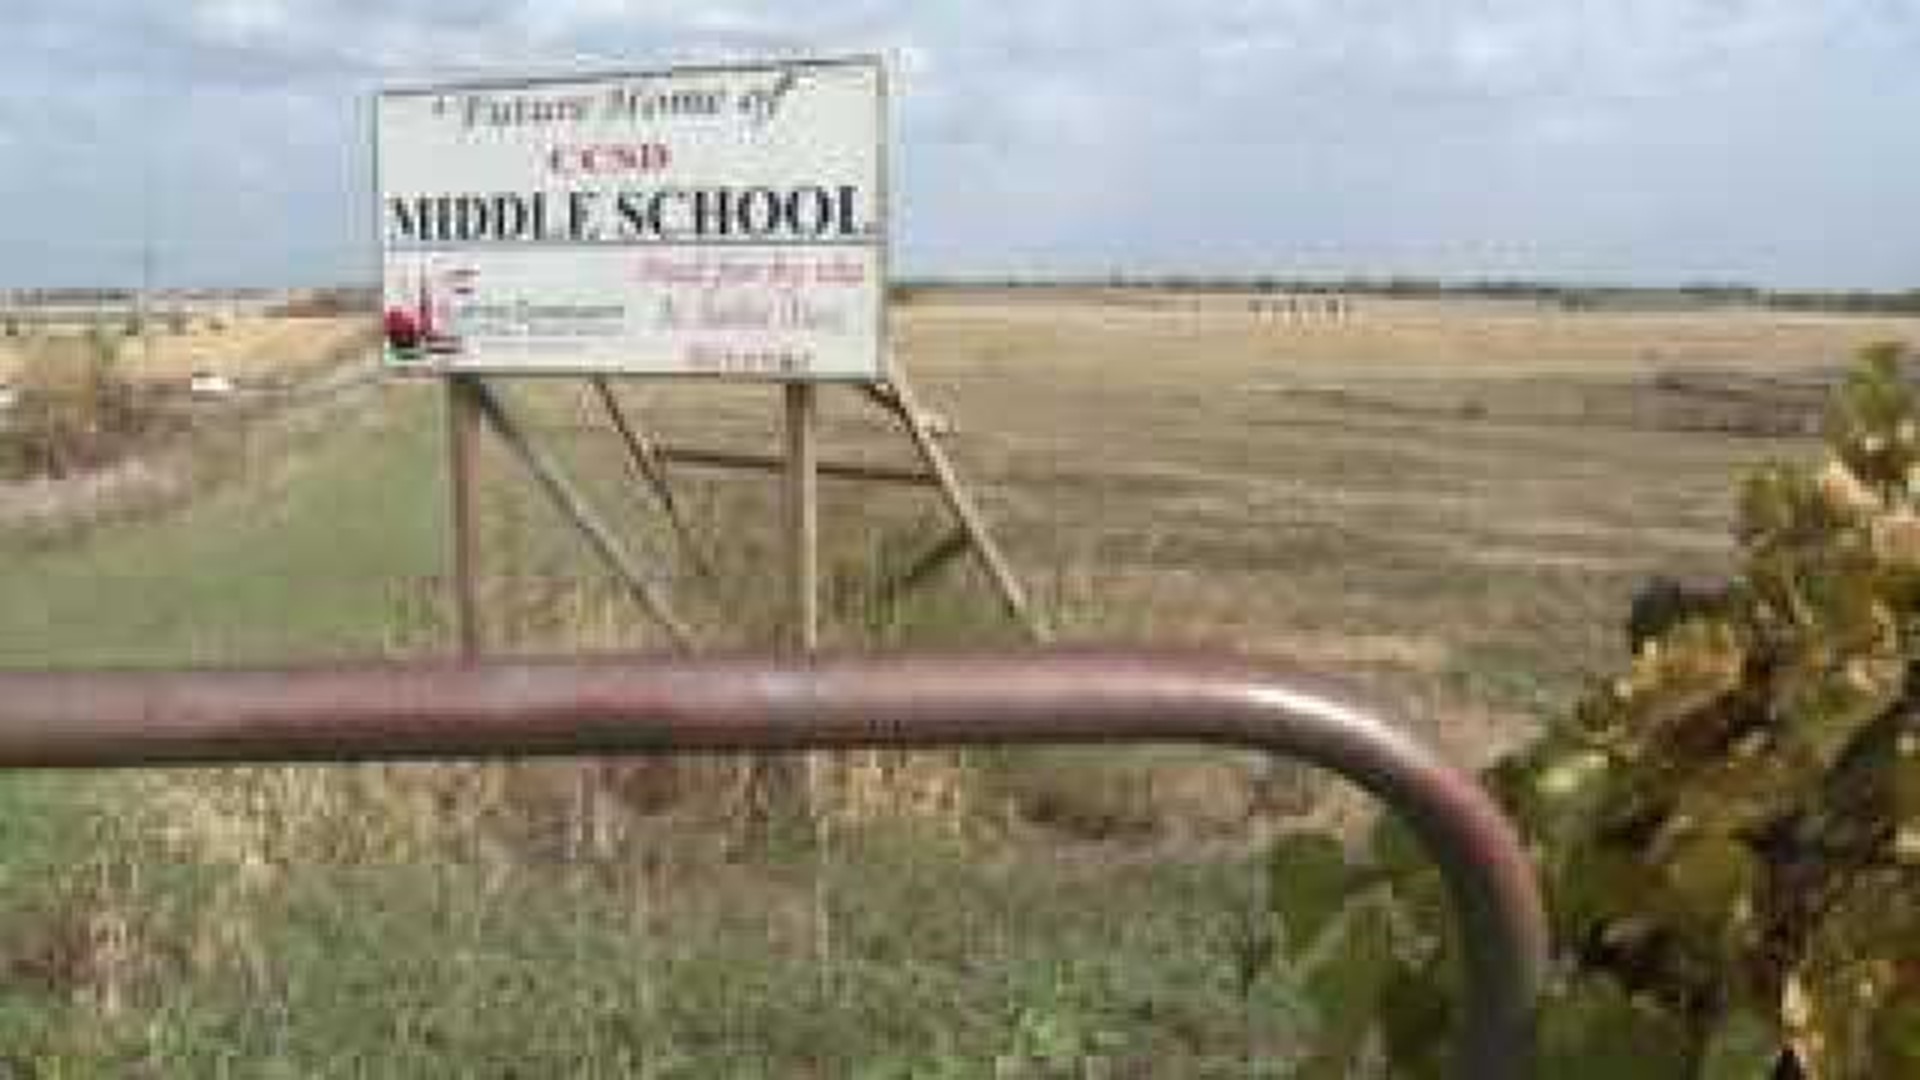 New Clinton Middle School hoping for boost from Thomson